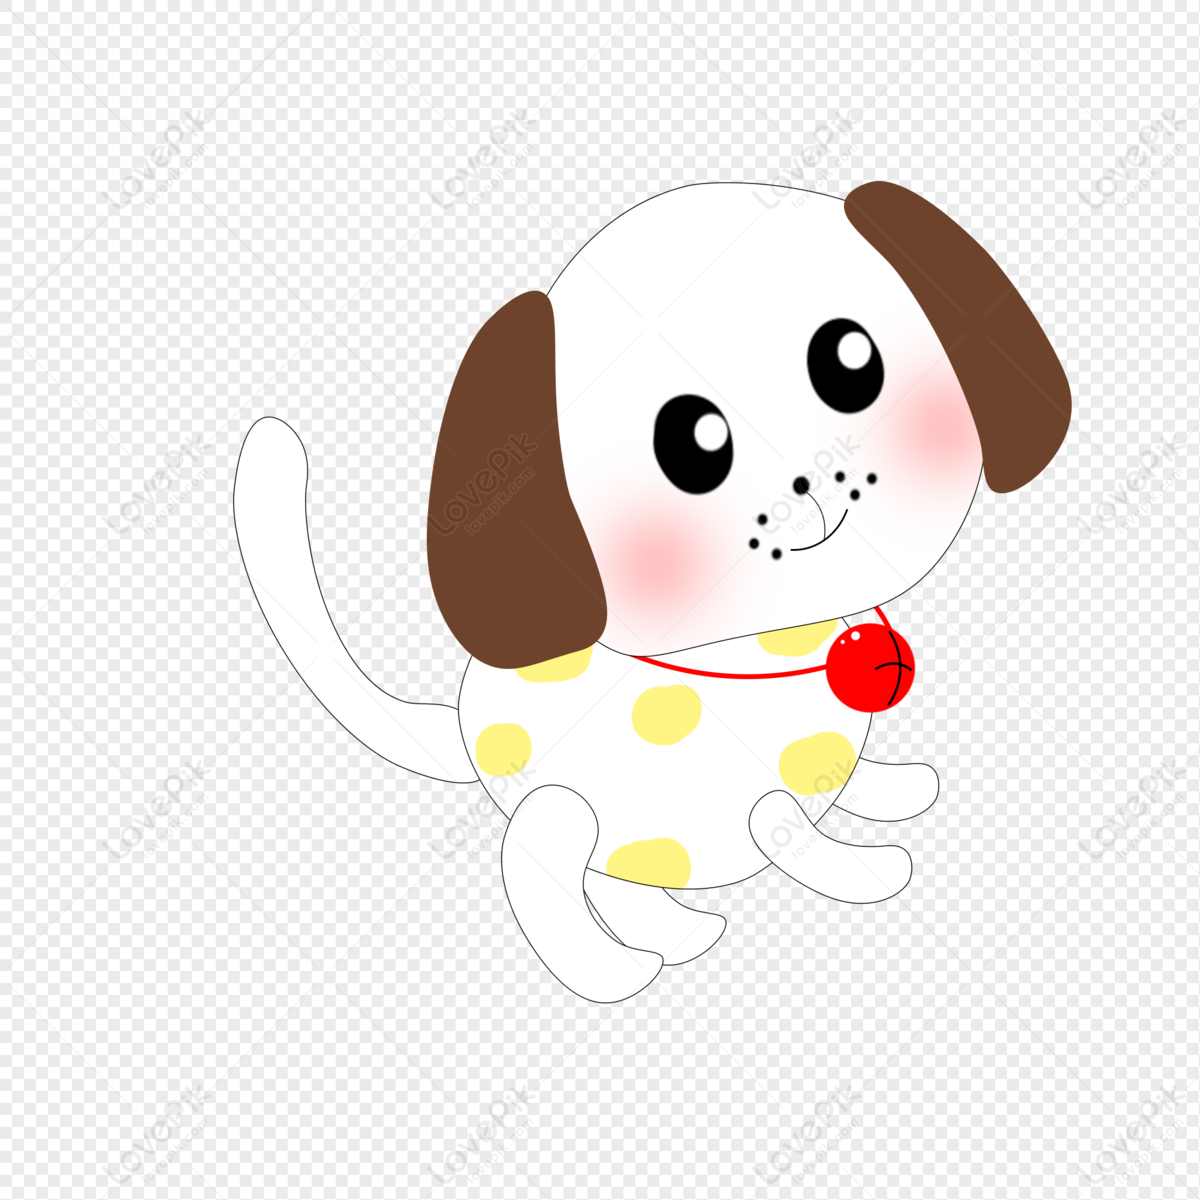 Cartoon Dog PNG Picture And Clipart Image For Free Download - Lovepik |  401276475